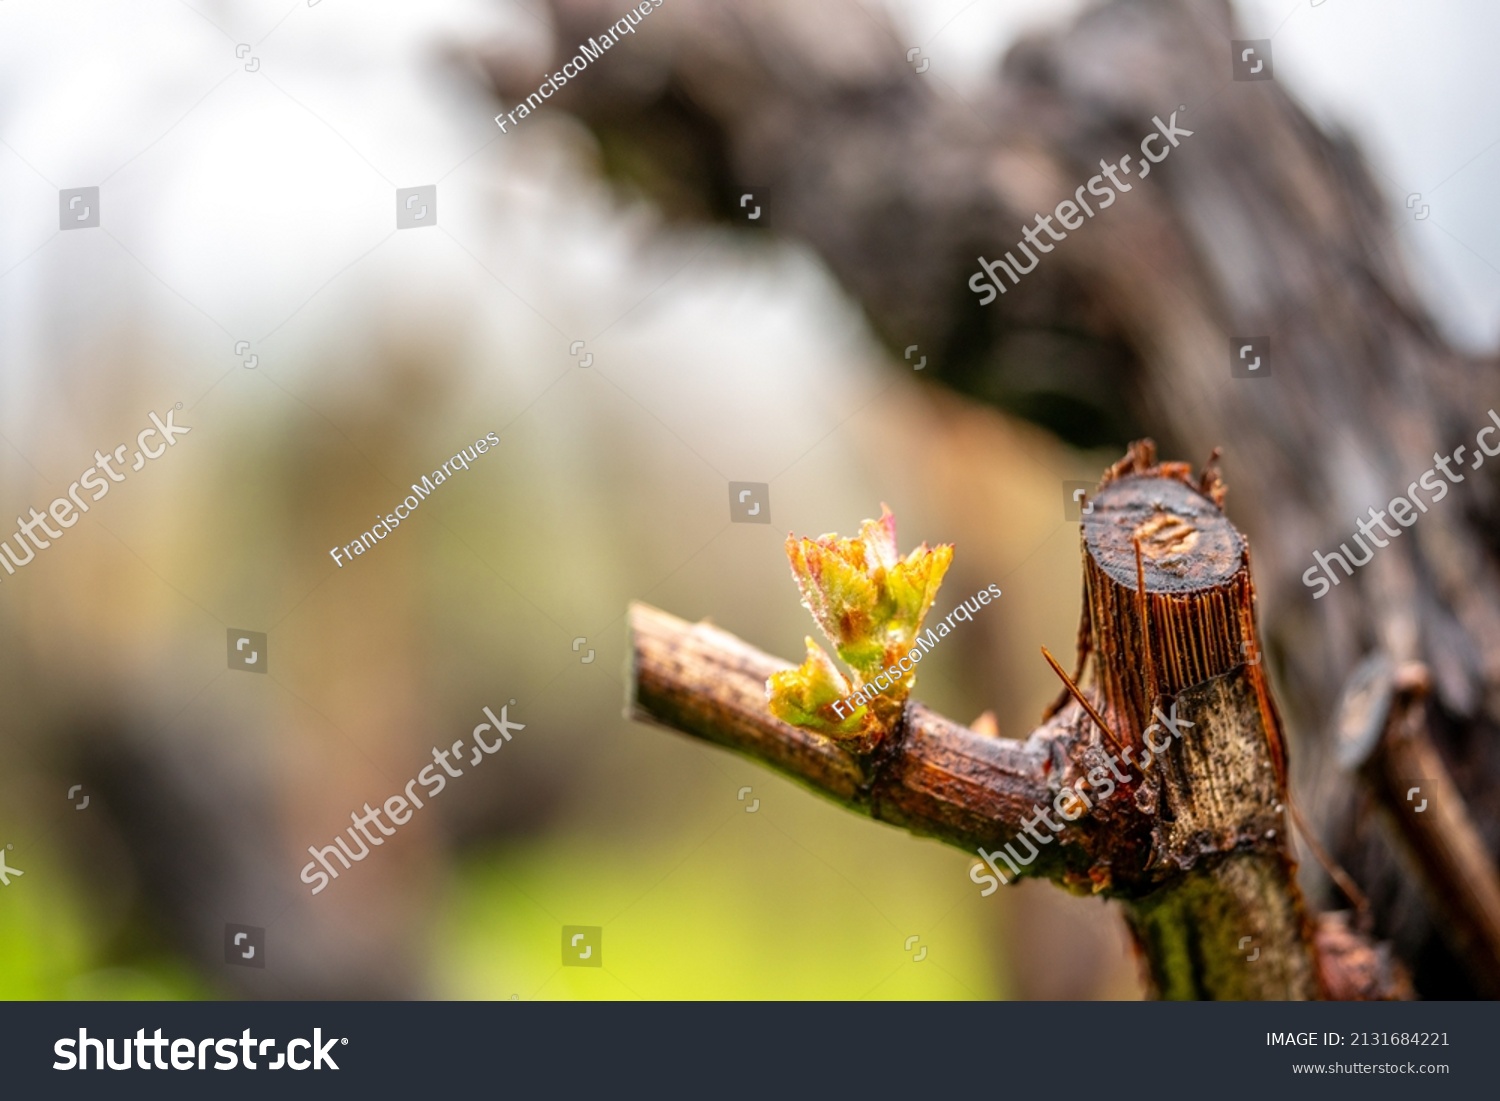 Close up on young grape, gems. with foliage on a little bench of the vine in the vineyards. Outdoor life in a rural environment, agriculture magic with nature blossoms. #2131684221